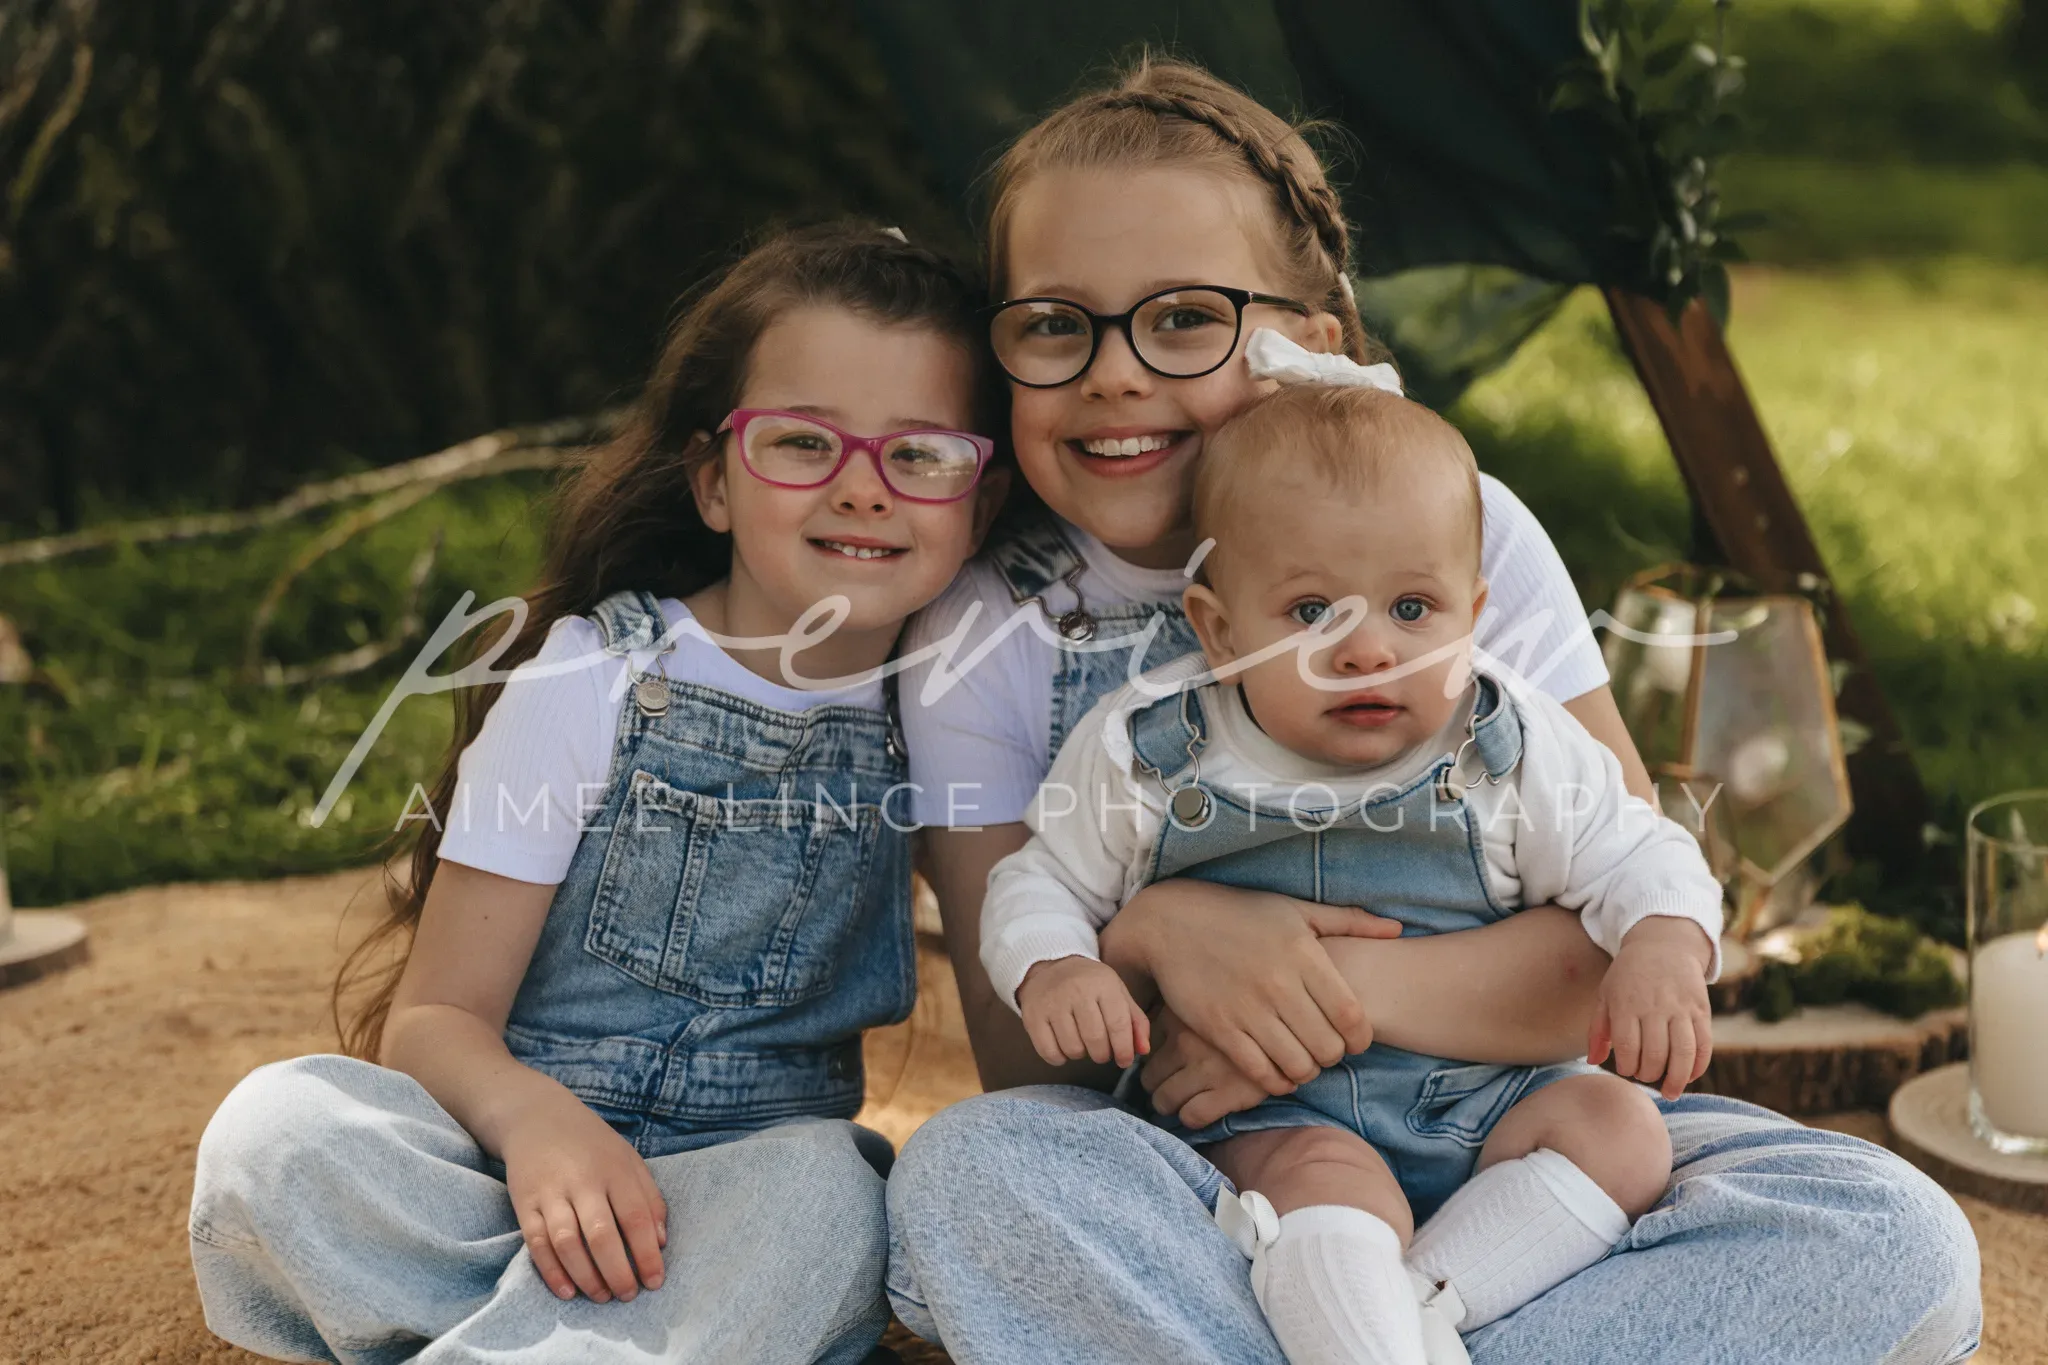 Two young girls and a baby sit outdoors. the older girls, wearing glasses and denim overalls, smile broadly. the baby, also in denim, is held by one of the girls. a picnic setup with a tent and a rug is visible behind them.